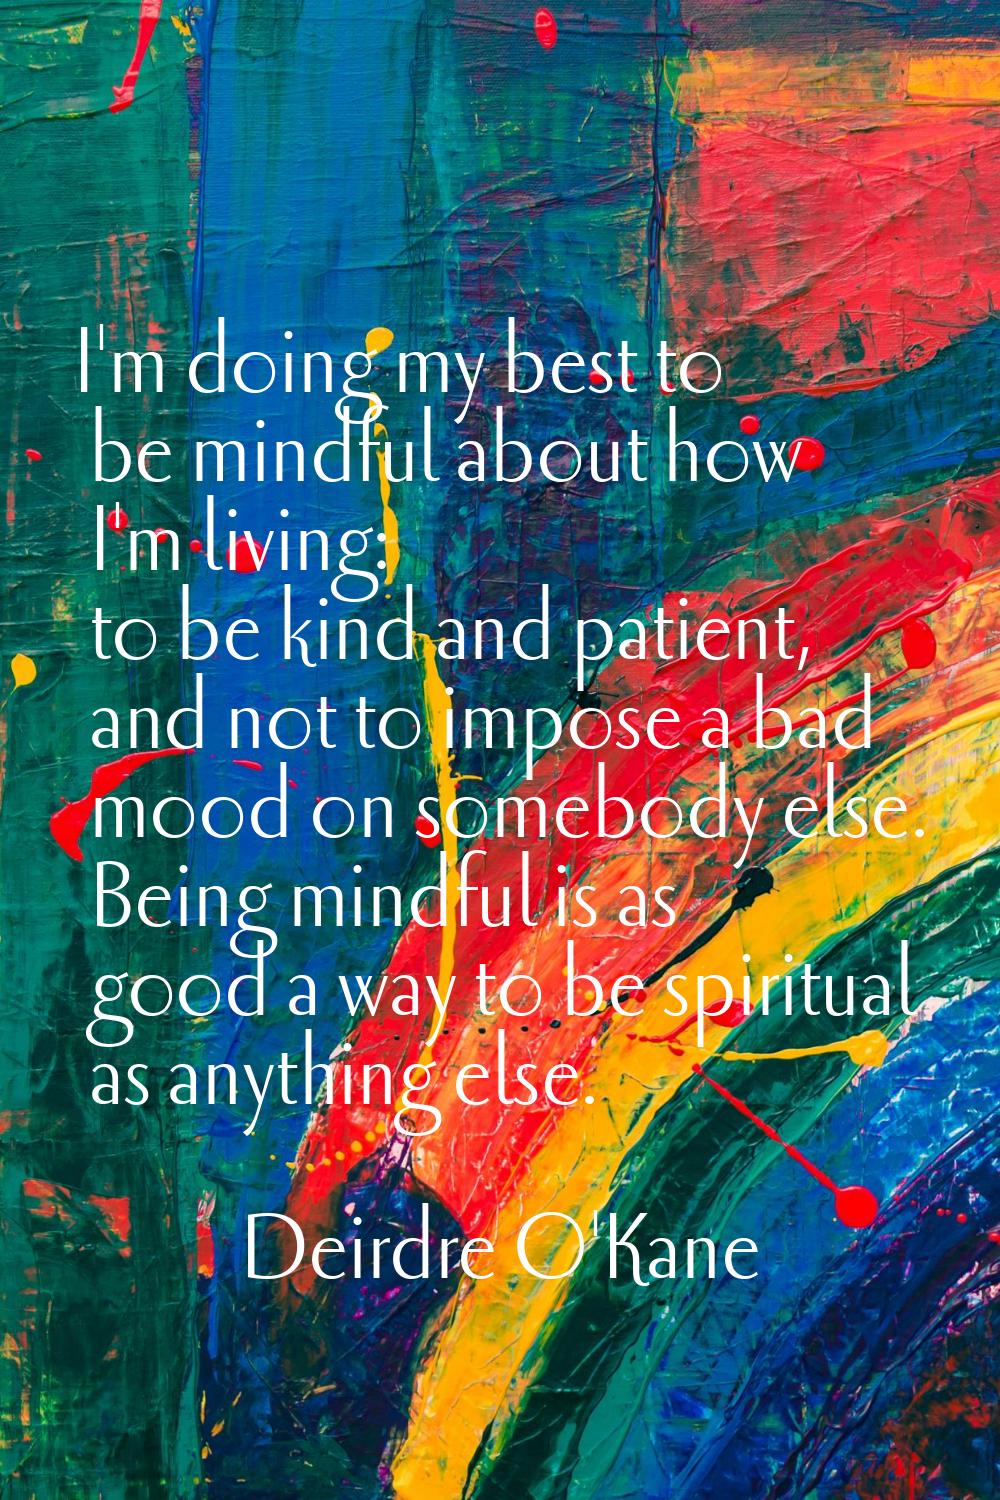 I'm doing my best to be mindful about how I'm living: to be kind and patient, and not to impose a b